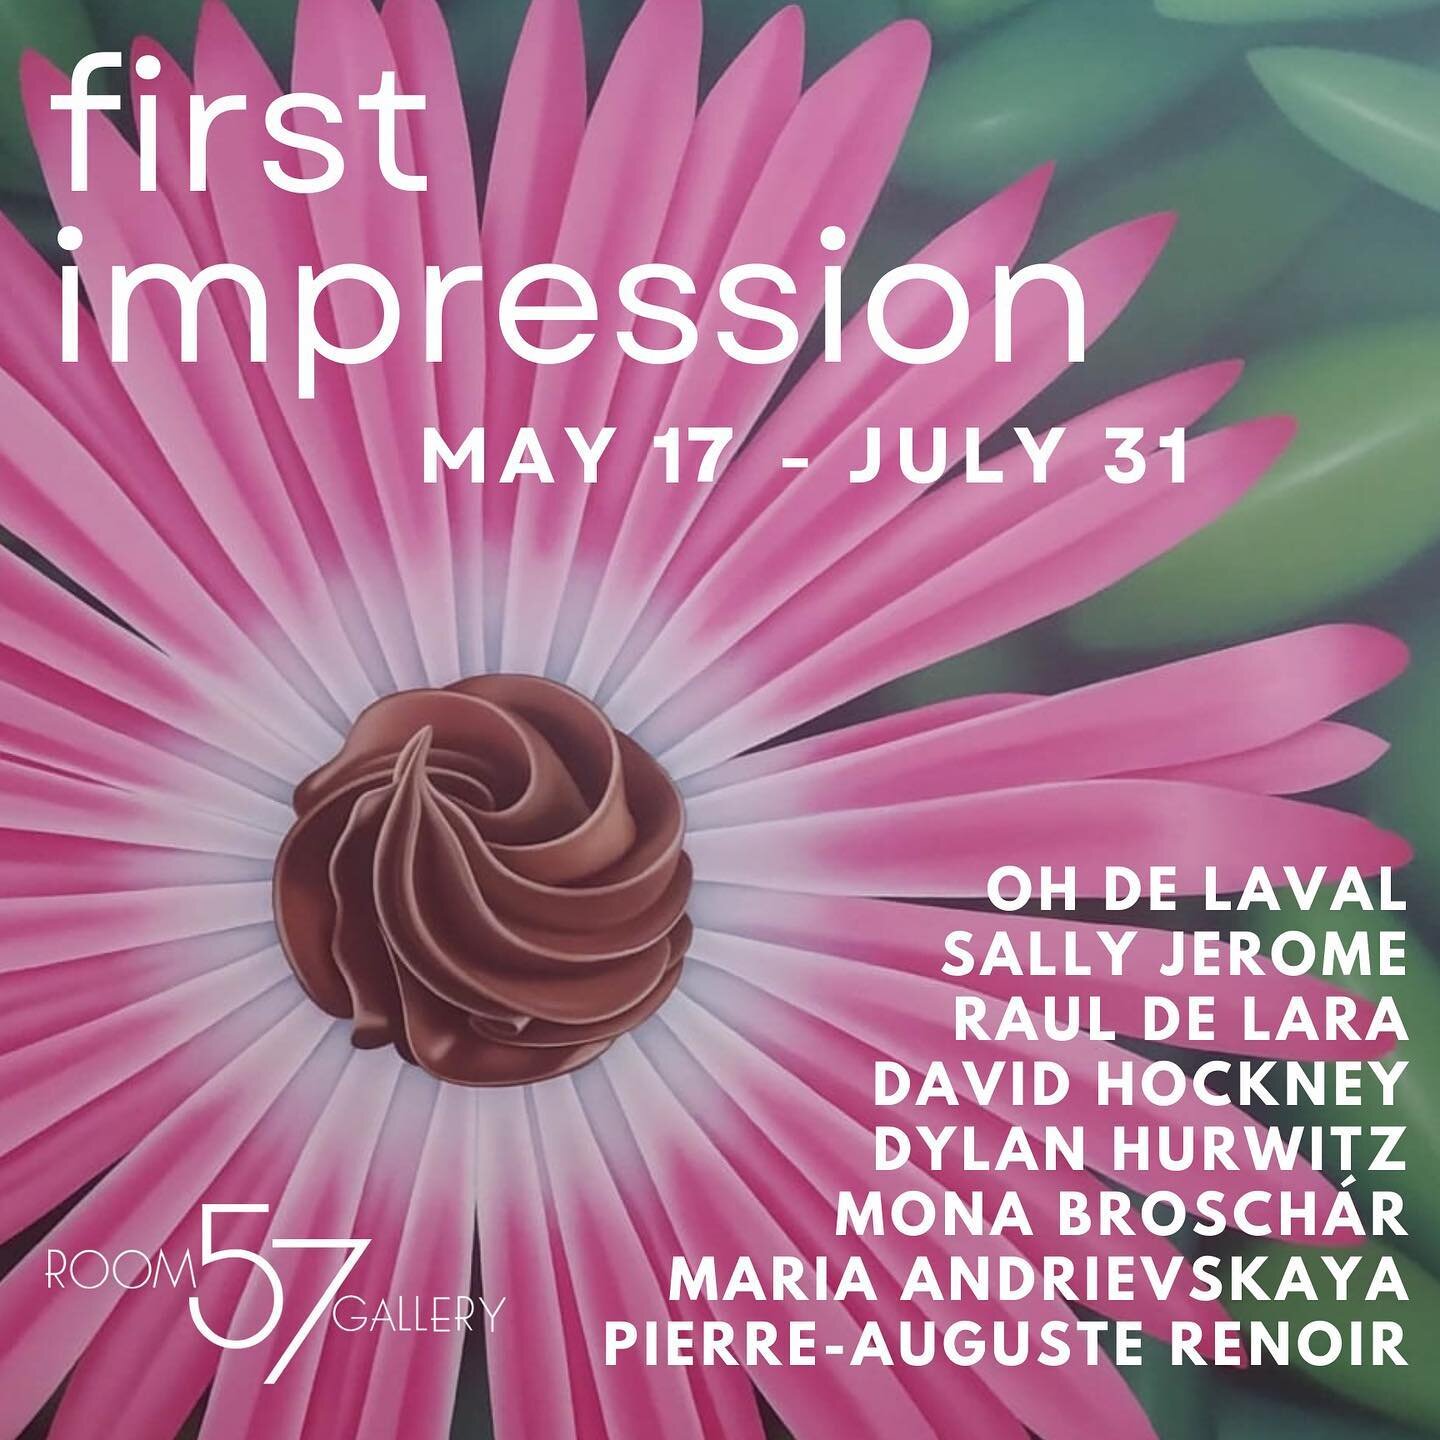 Room 57 Gallery is proud to present &ldquo;First Impression&rdquo; featuring the work of artists Maria Andrievskaya, Mona Broschar, David Hockney, Dylan Hurwitz, Raul De Lara, Oh de Laval, and Pierre-Auguste Renoir. First Impressions&rsquo; meaning i